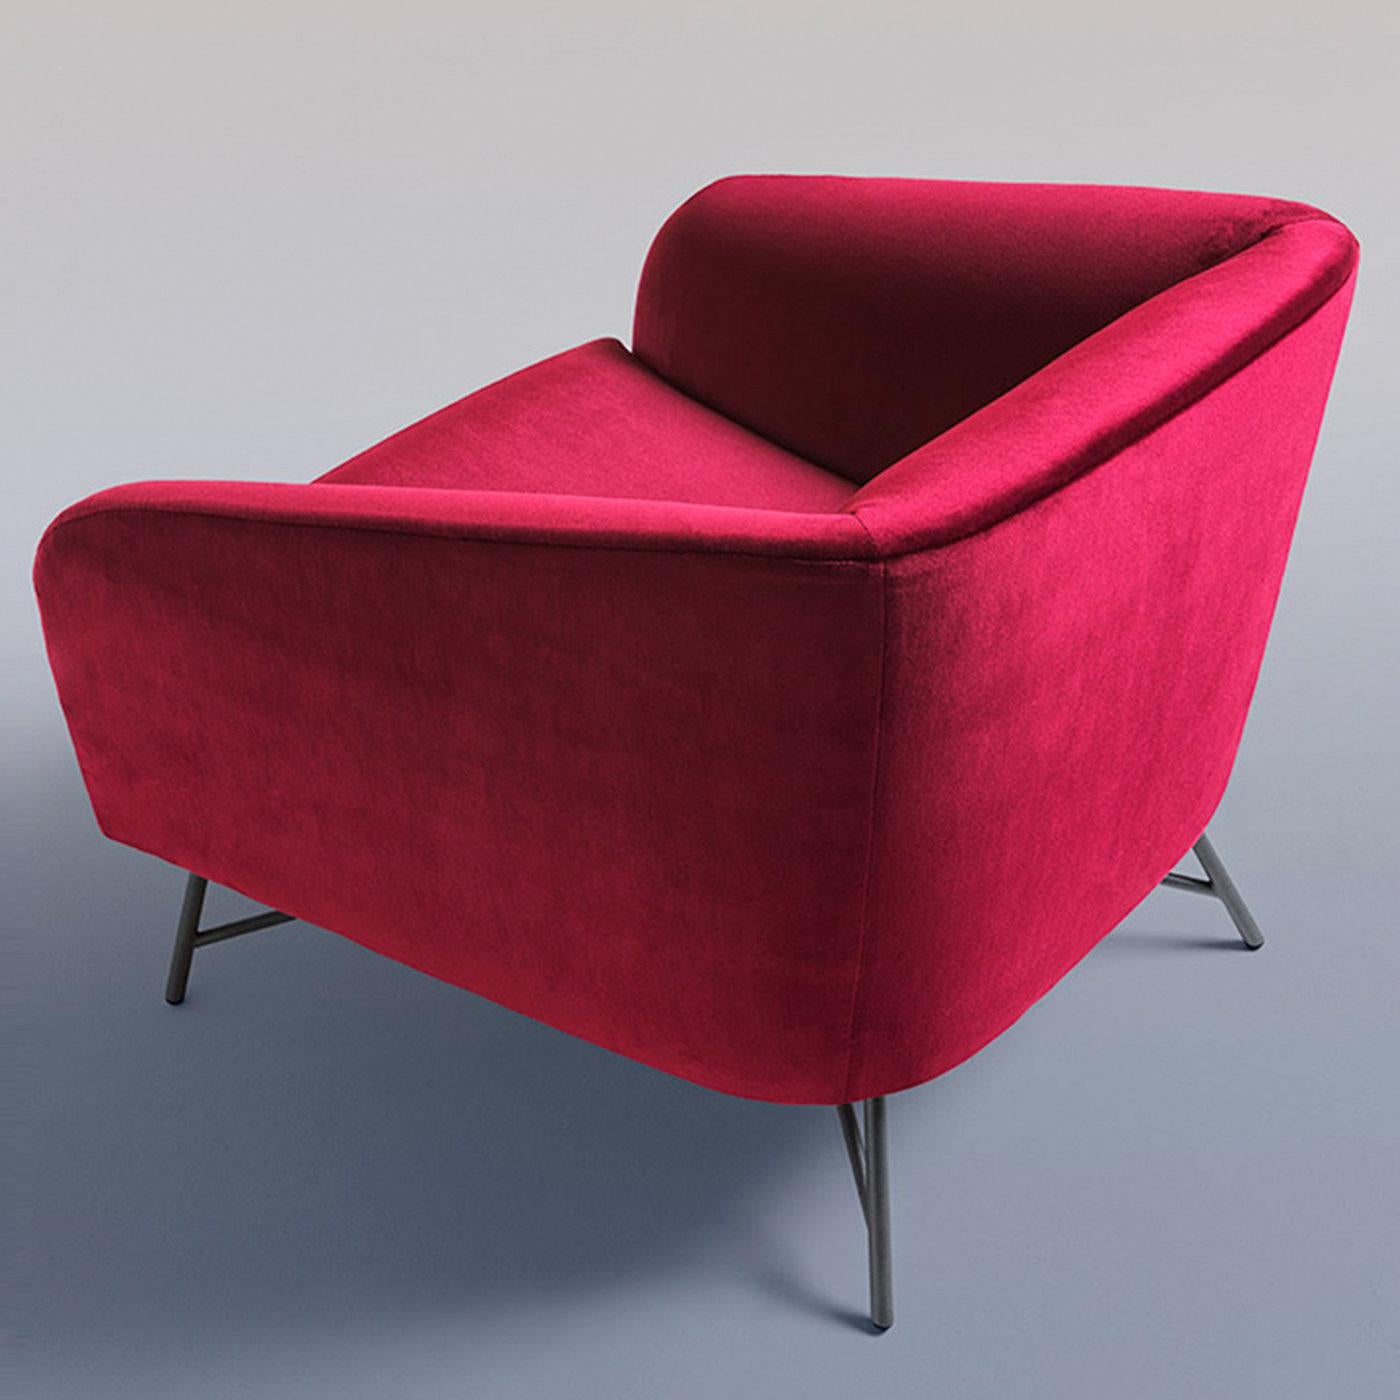 Gentle slopes and bold volumes define the enthralling look of this armchair with a wooden frame, ideal for enlivening modern settings with its vibrant burgundy velvet upholstery. Cylindrical elements dynamically arranged to comprise the